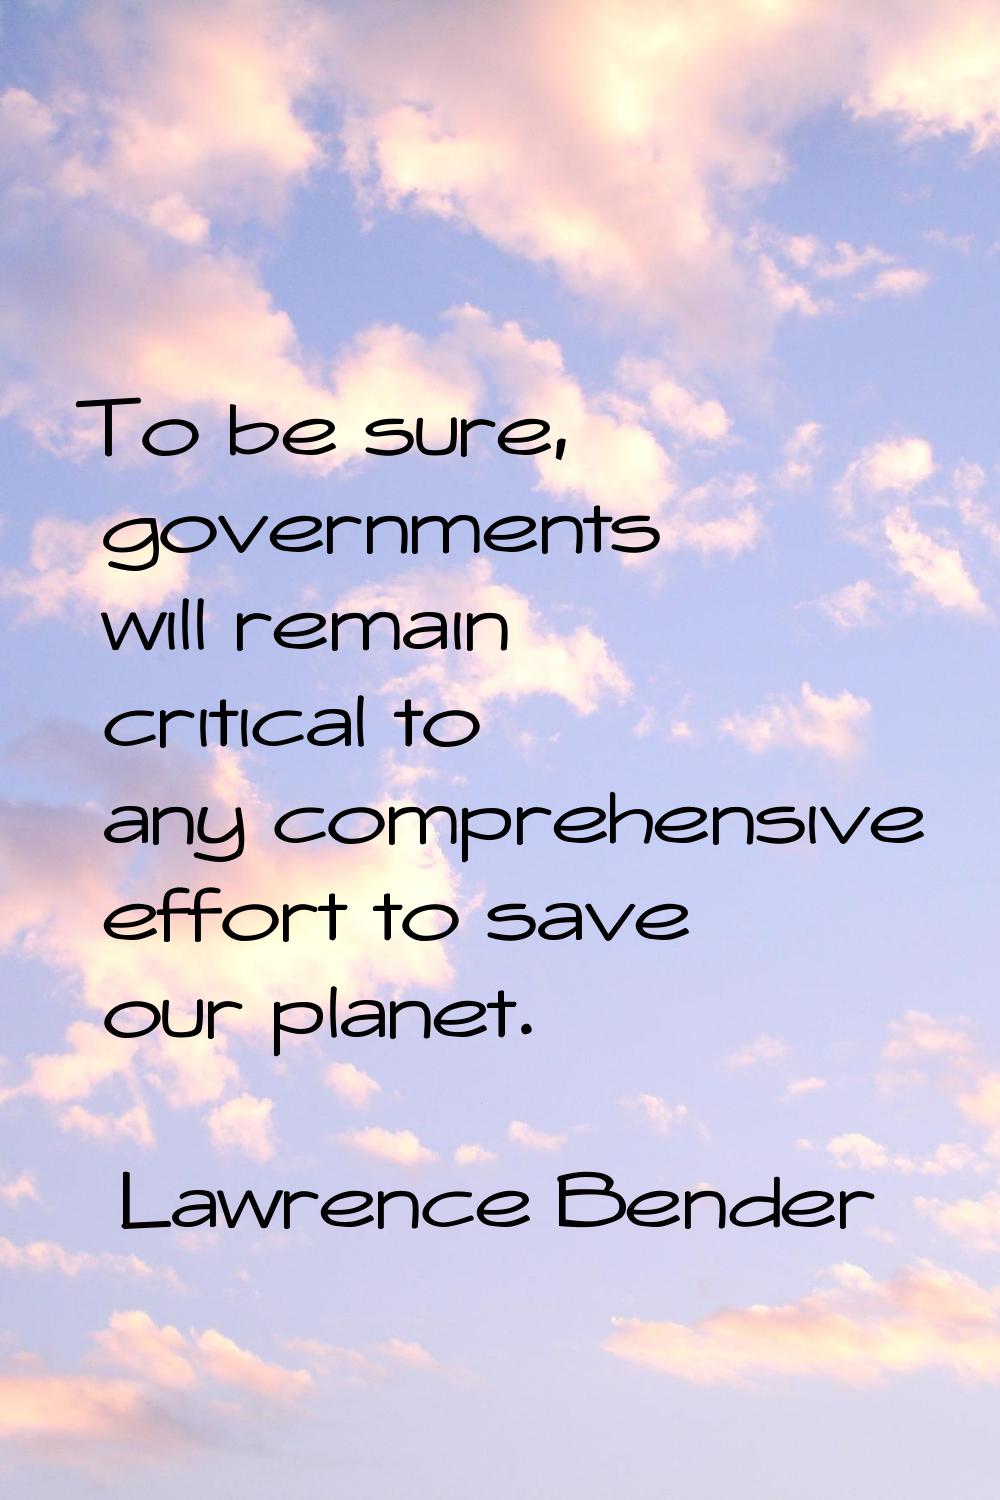 To be sure, governments will remain critical to any comprehensive effort to save our planet.